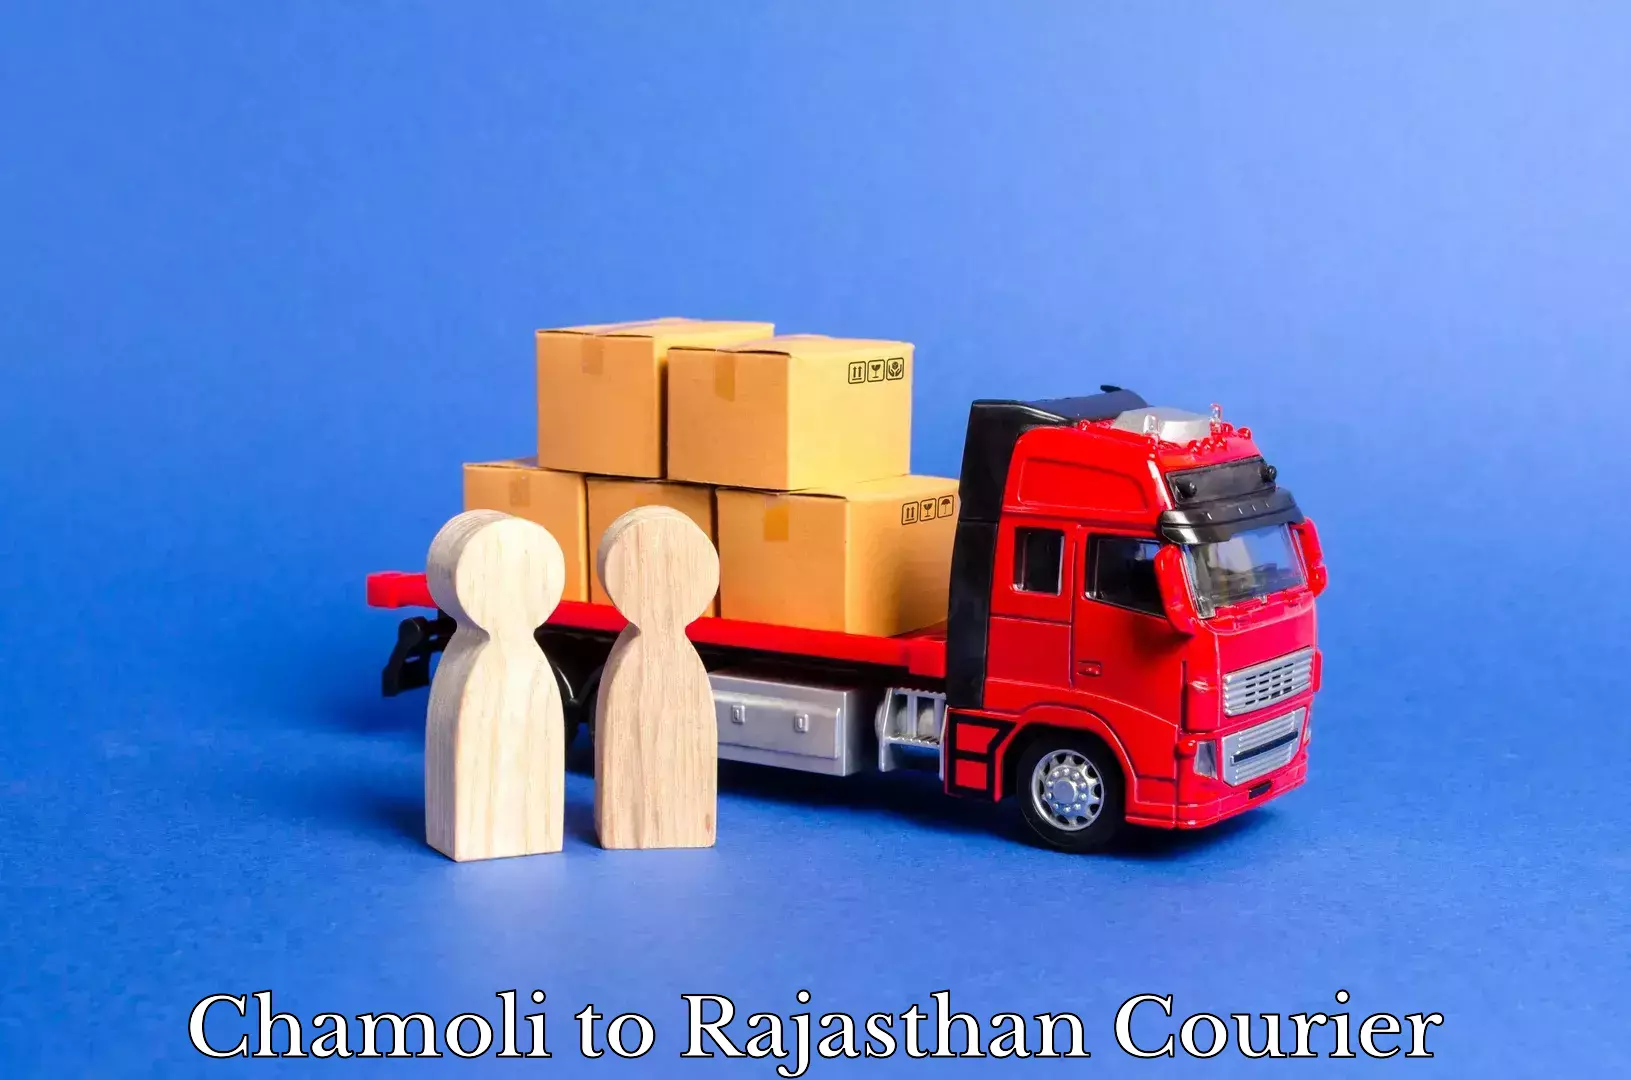 Doorstep delivery service Chamoli to Rajasthan